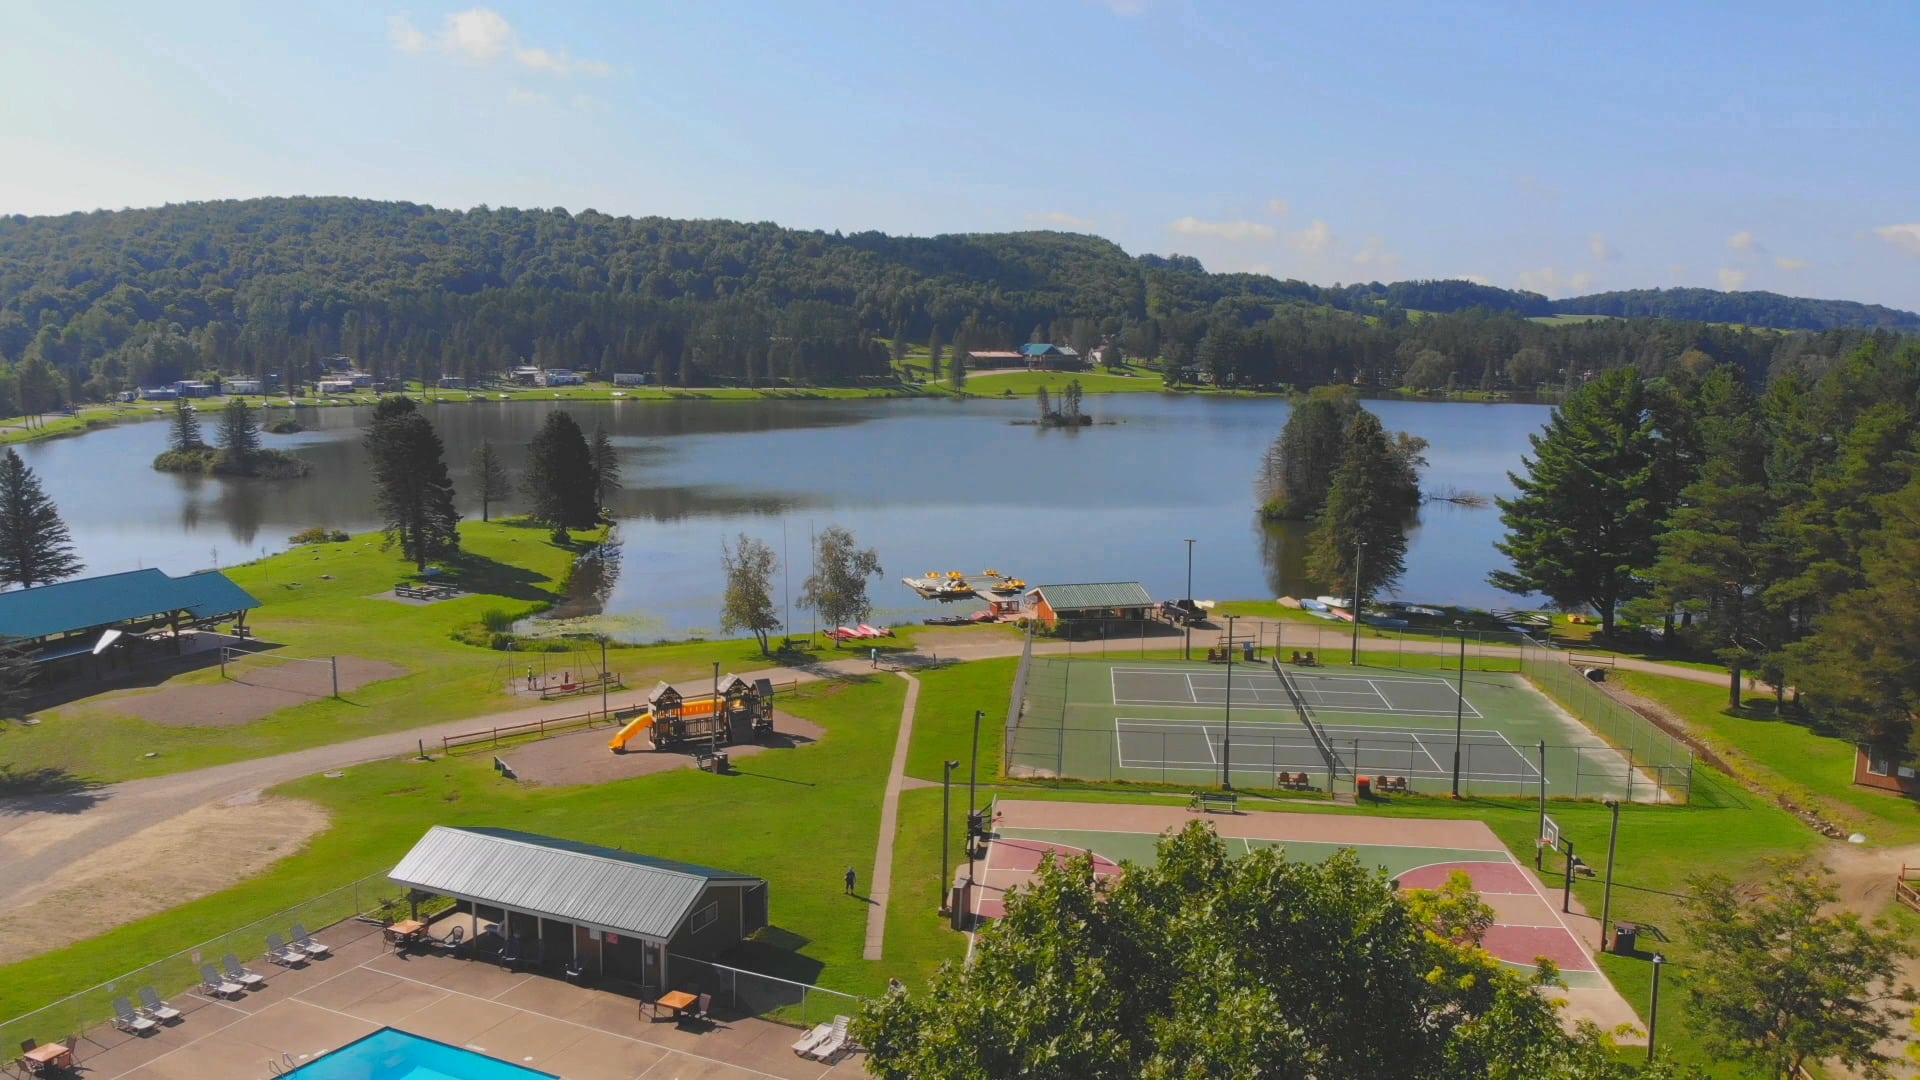 An aerial view of a tennis court situated by a serene lake.